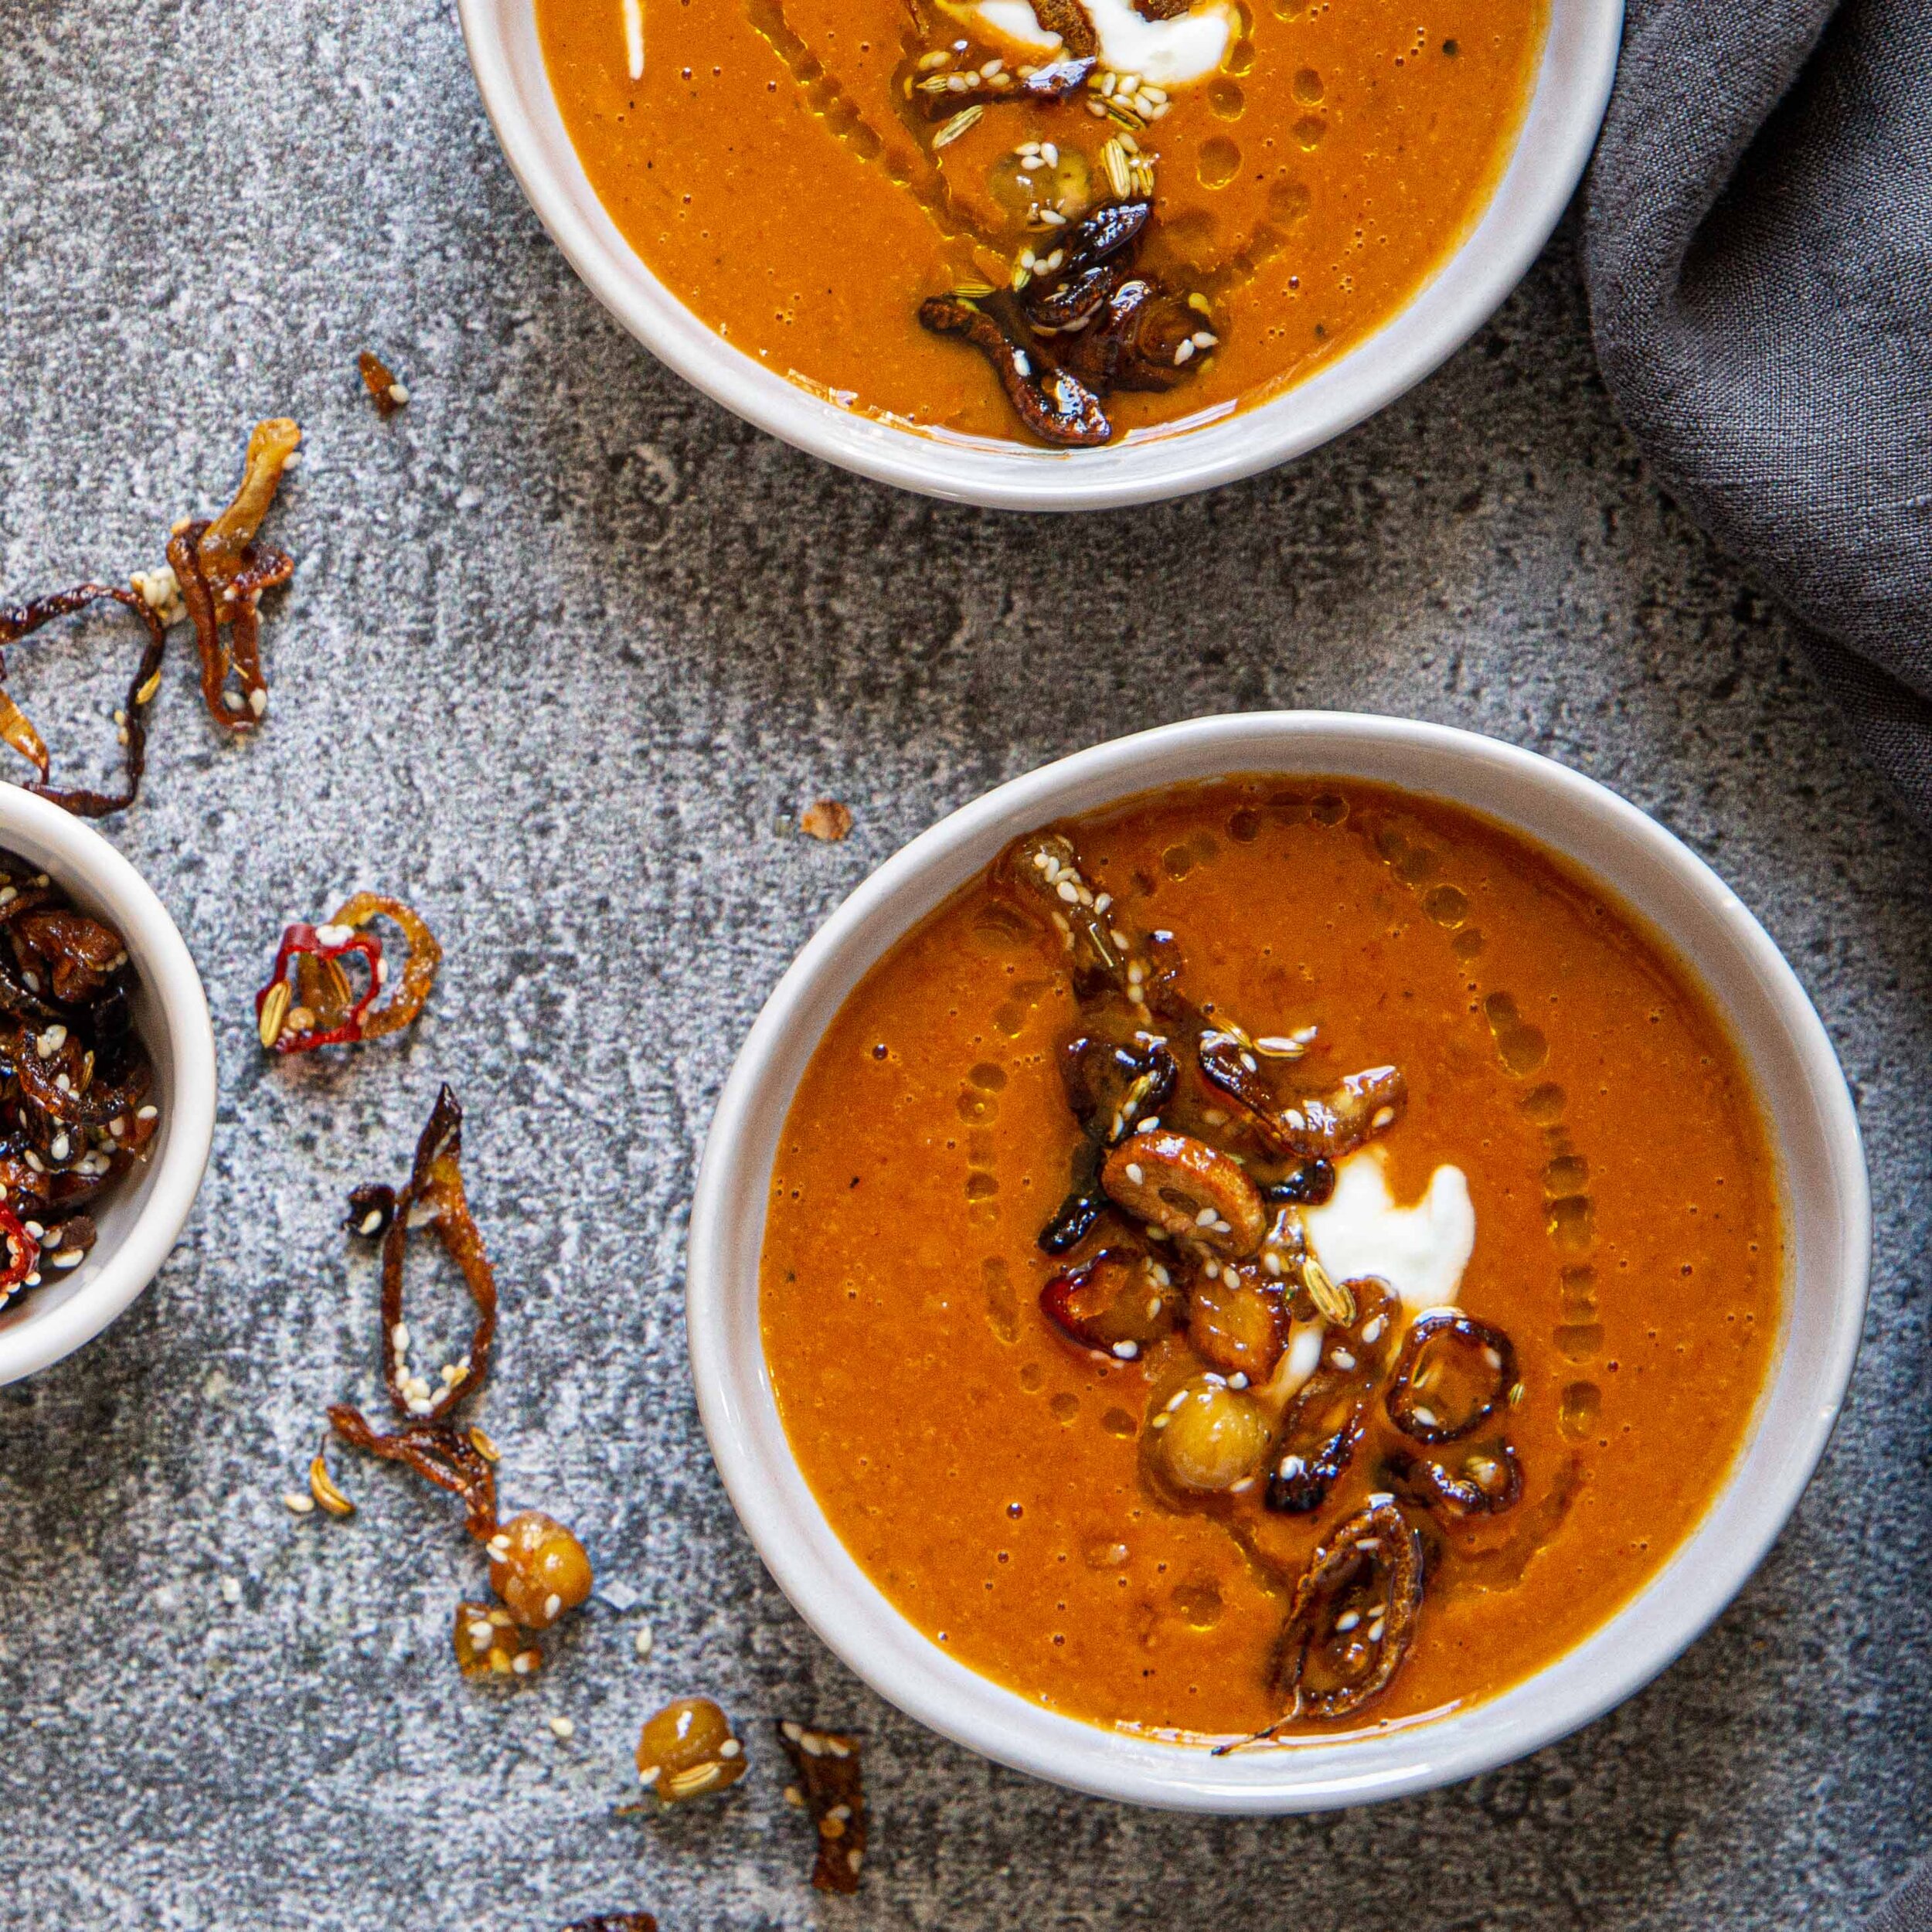 Spicy Butternut Squash Soup — page & plate